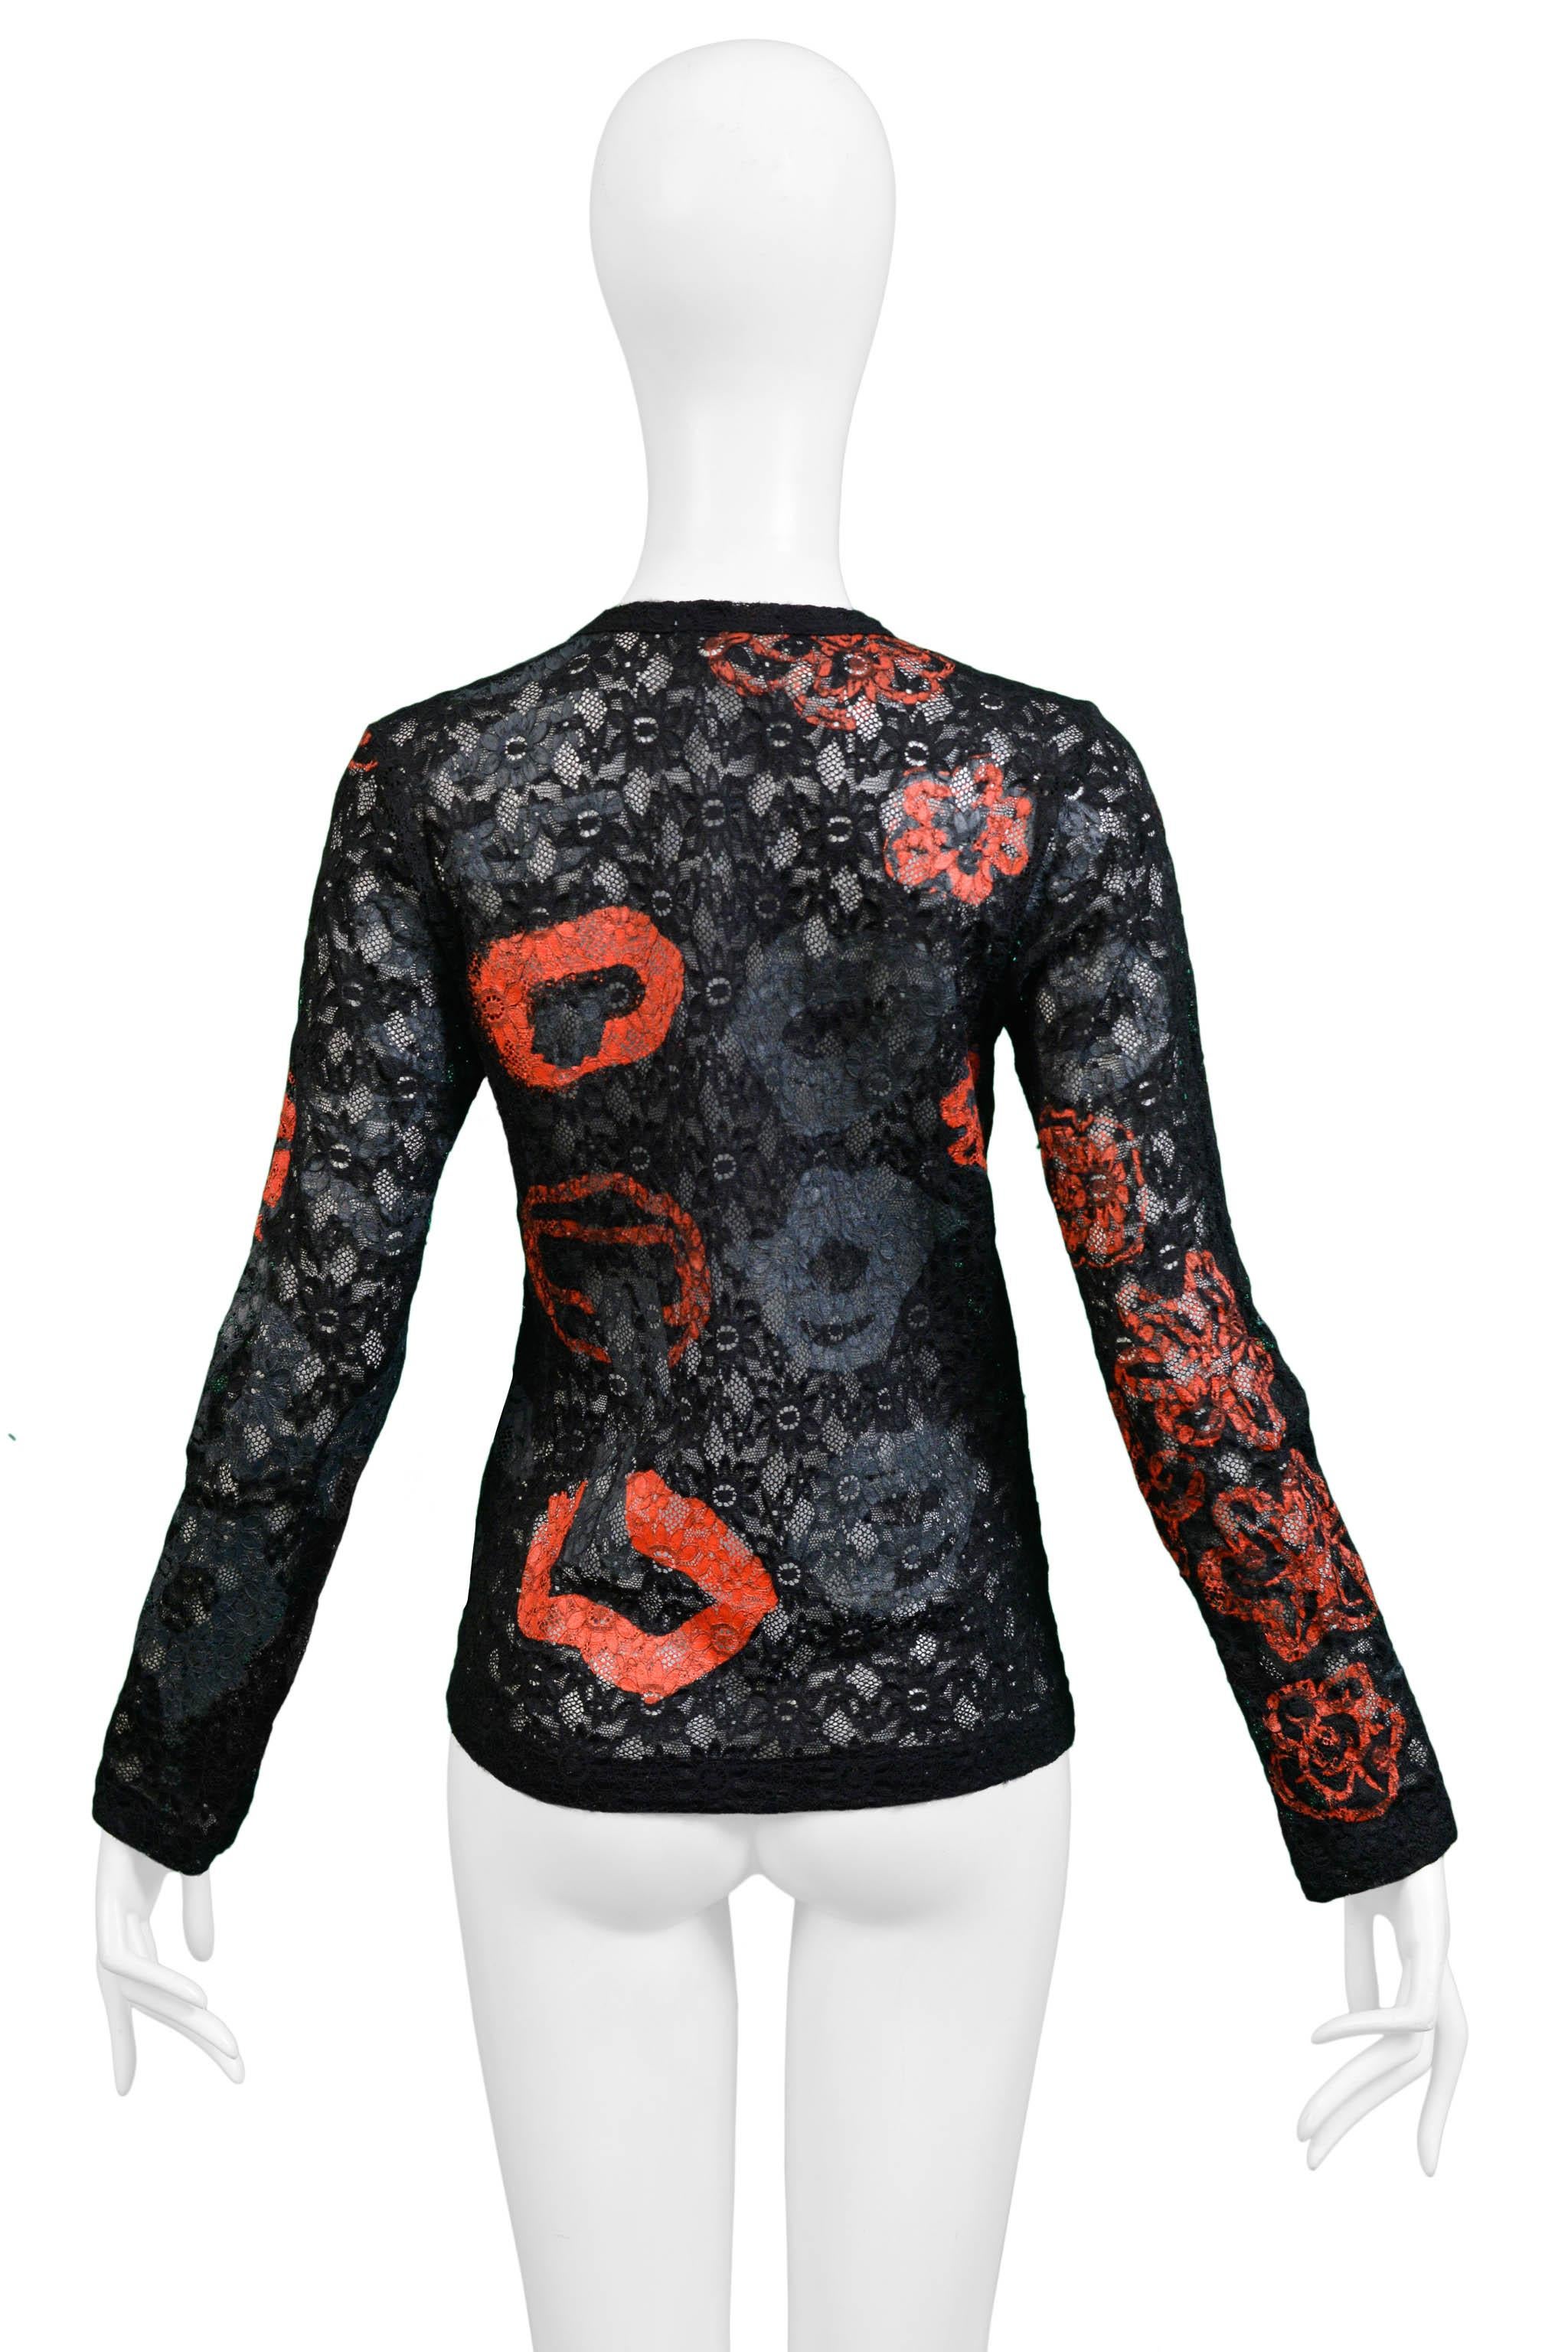 Comme Des Garcons Black Red & Grey Printed Lace Top 2000 In Excellent Condition For Sale In Los Angeles, CA